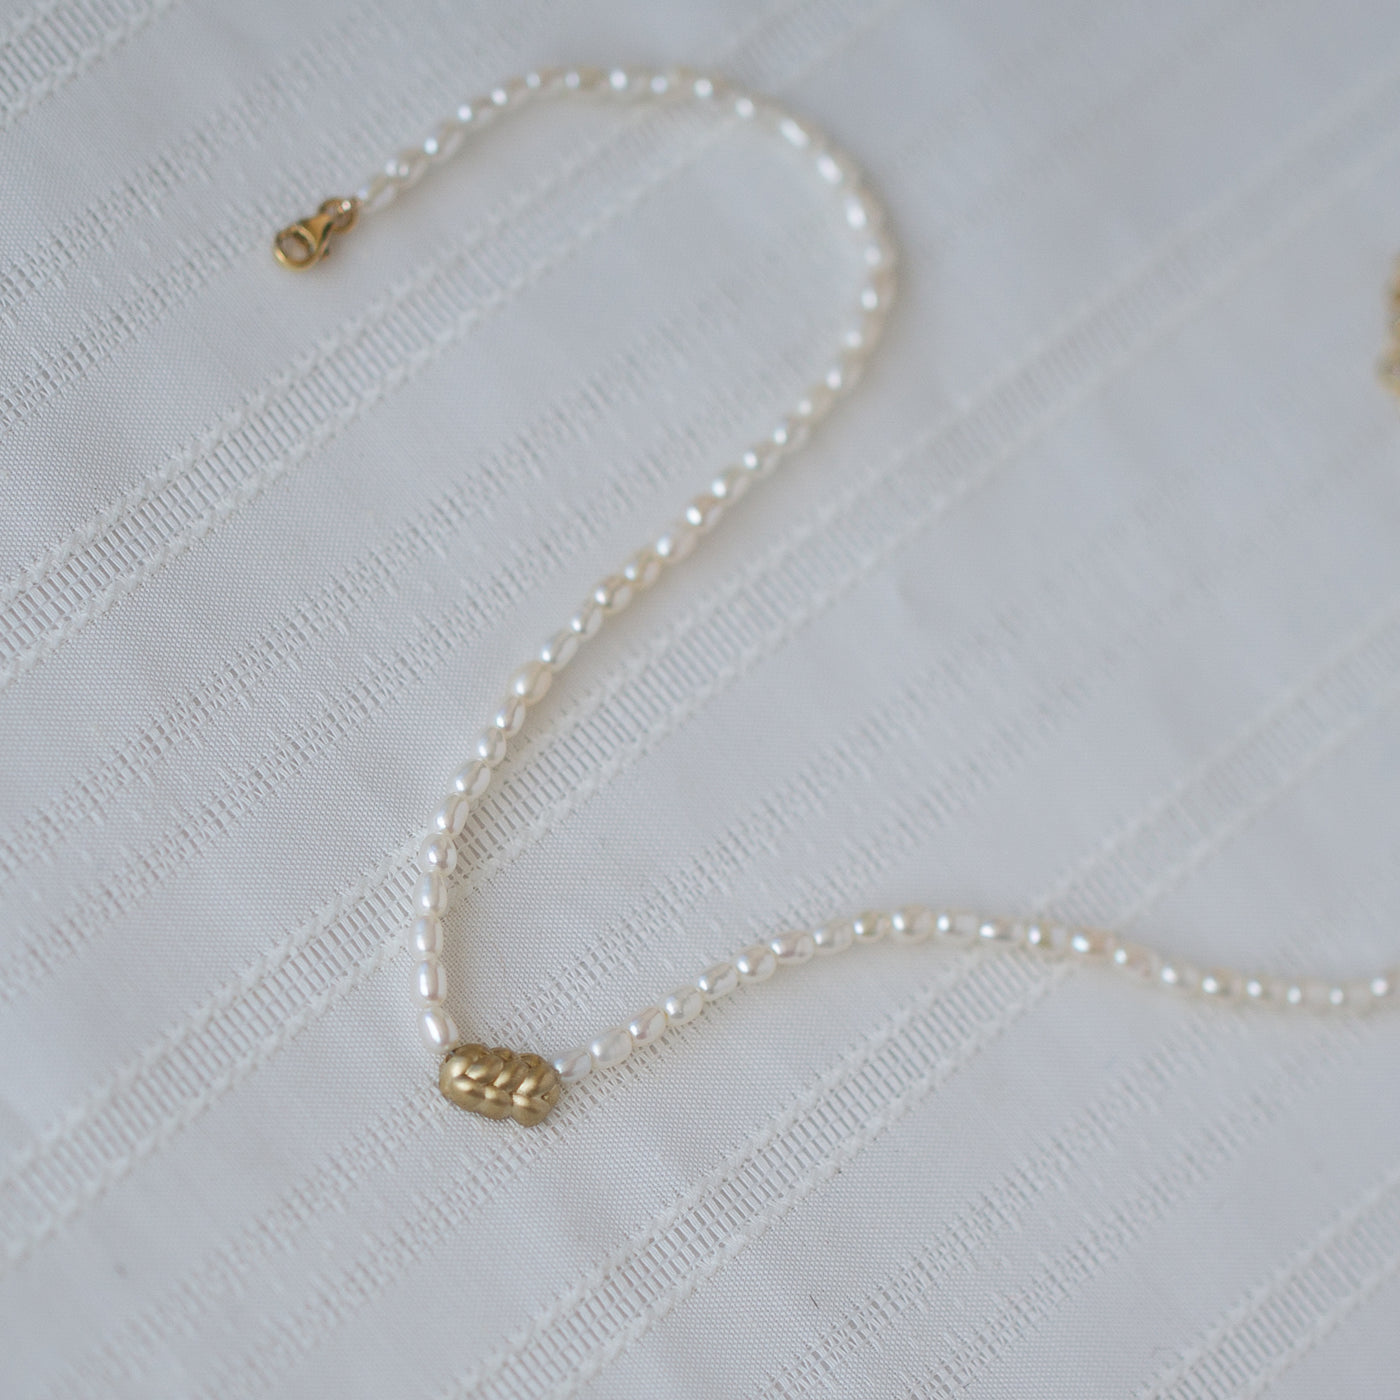 14K Gold and pearls necklace with a Challah pendant